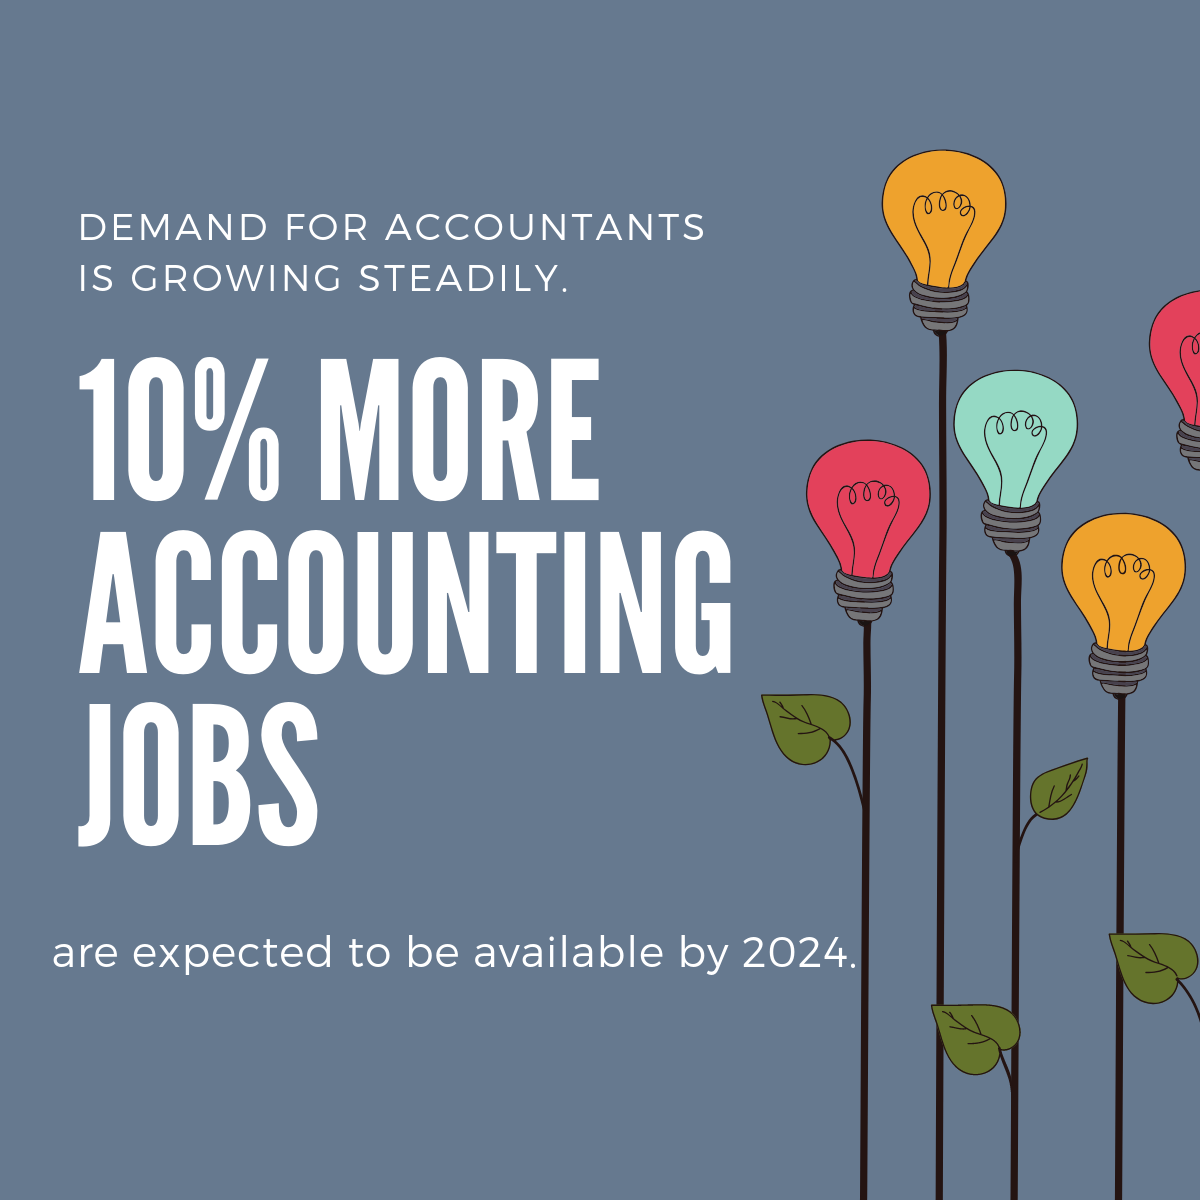 Demand for accountants is growing steadily. 10% more accounting jobs are expected to be available by 2024.